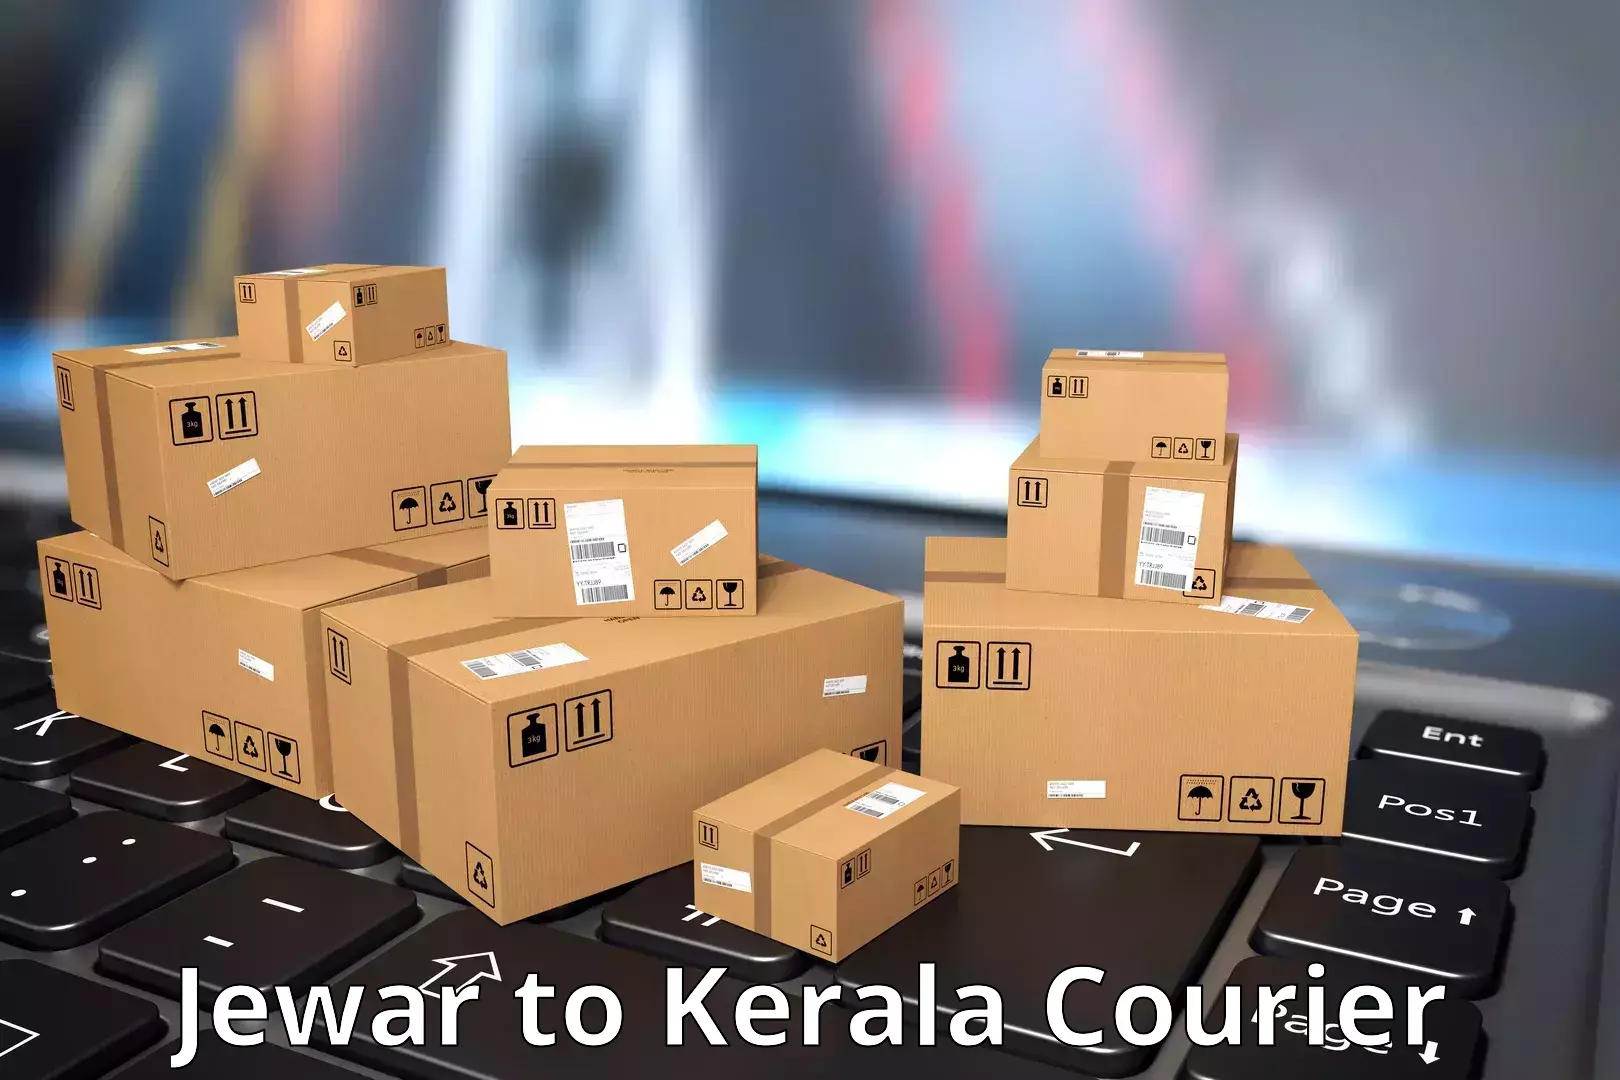 Business delivery service Jewar to Kerala